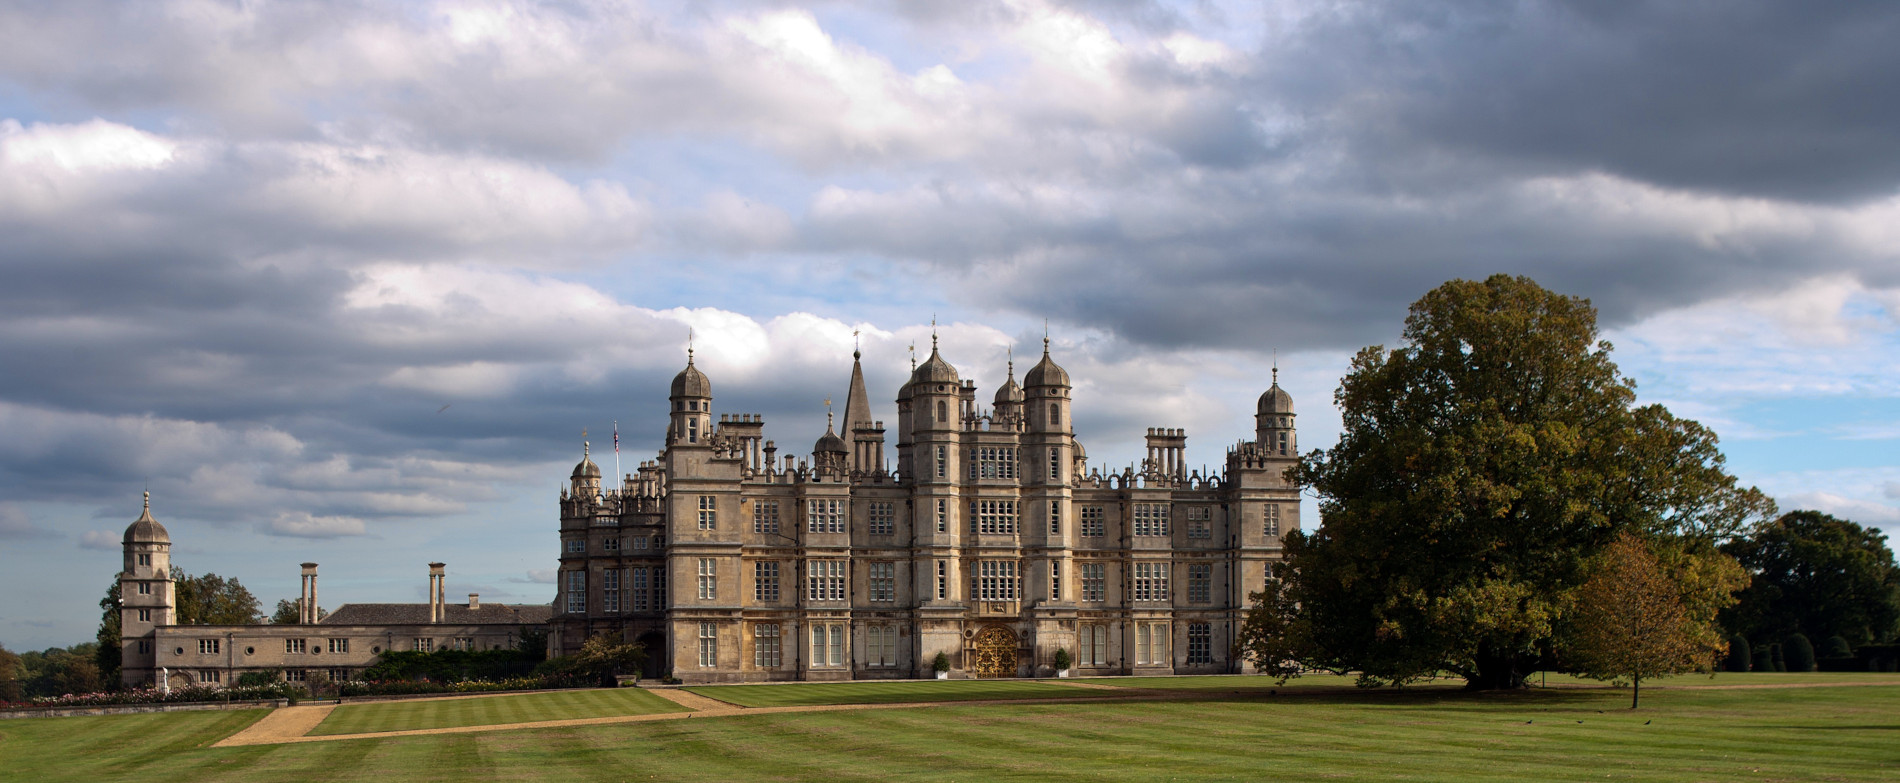 Image of a stately home.